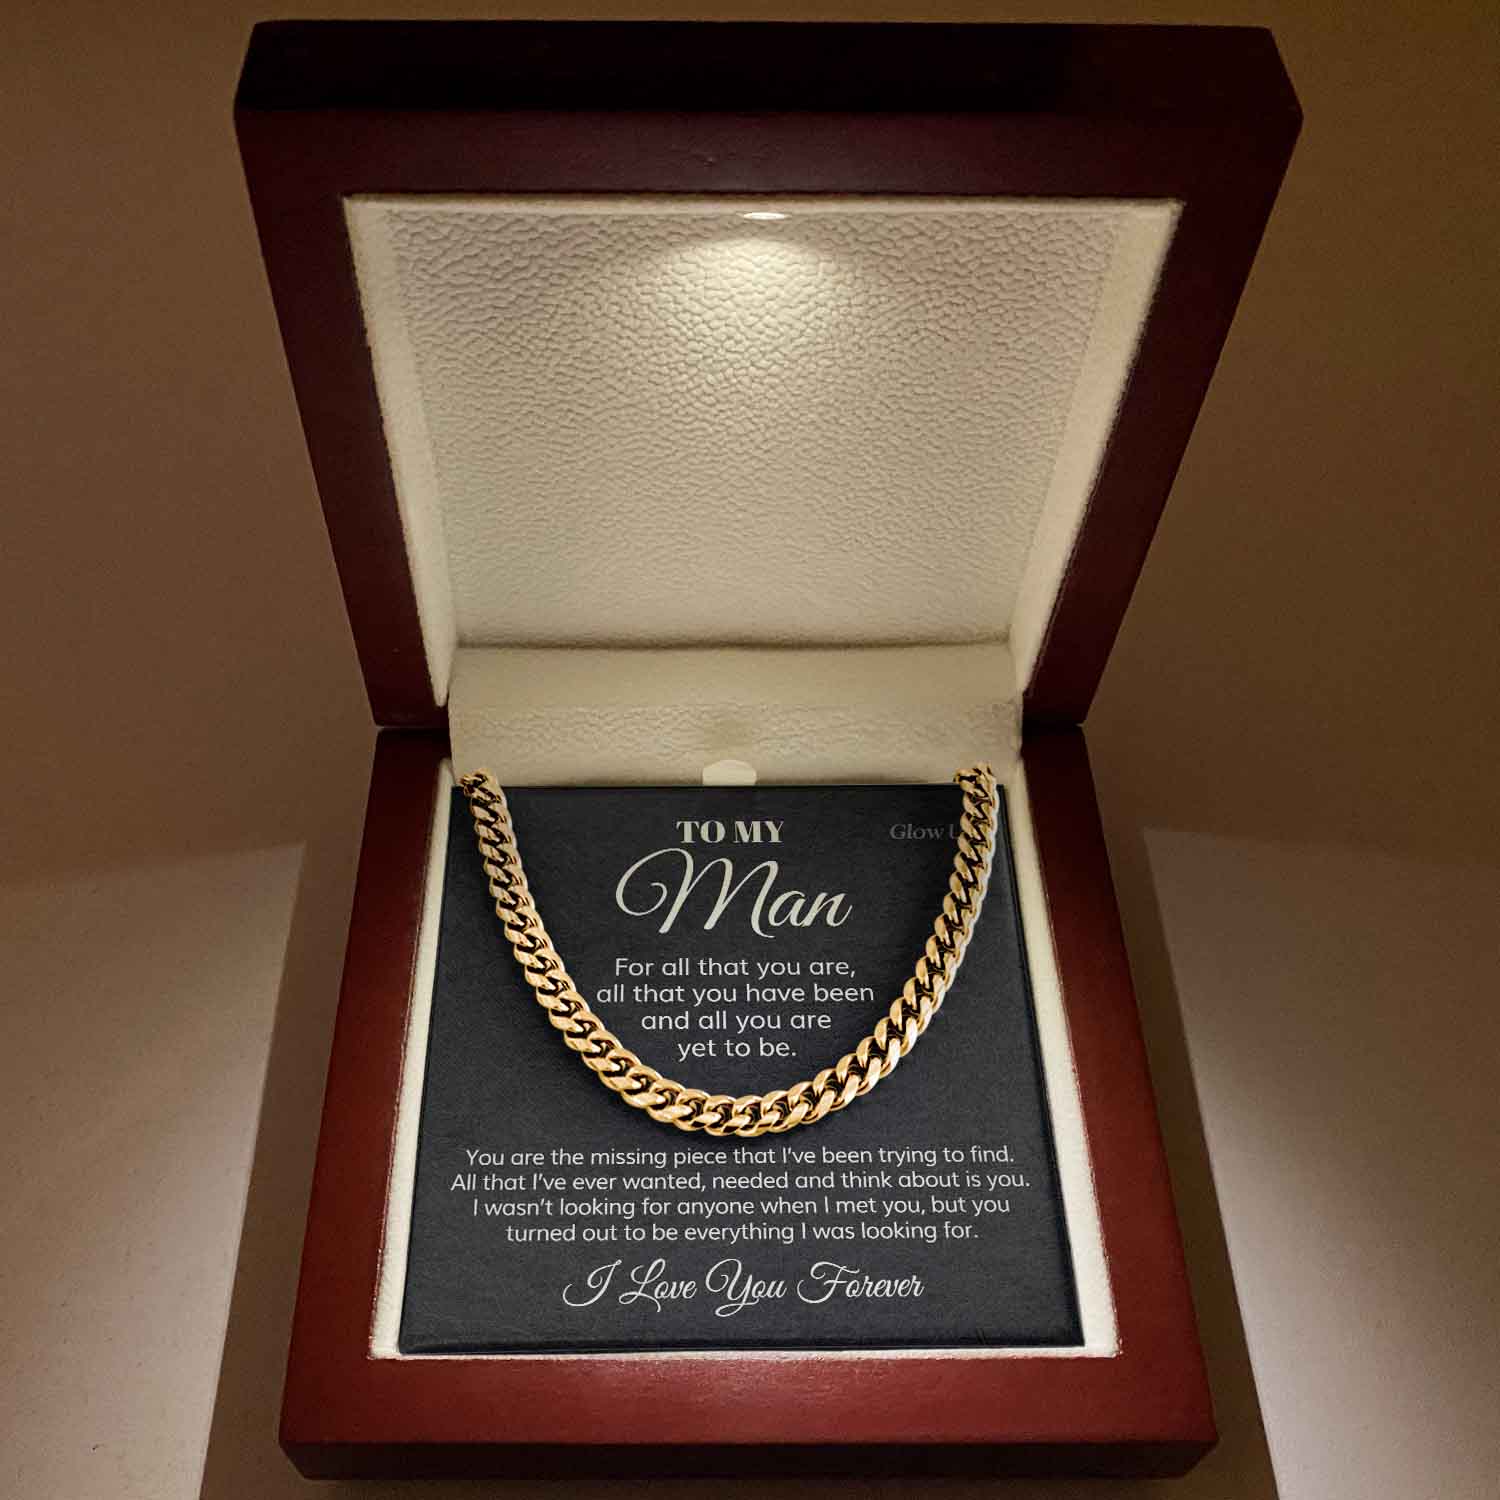 Glow Up Cuban Link Chain 18k Gold Over Stainless Steel / Luxury LED Box To my Man - Cuban Link Chain - For all that you are